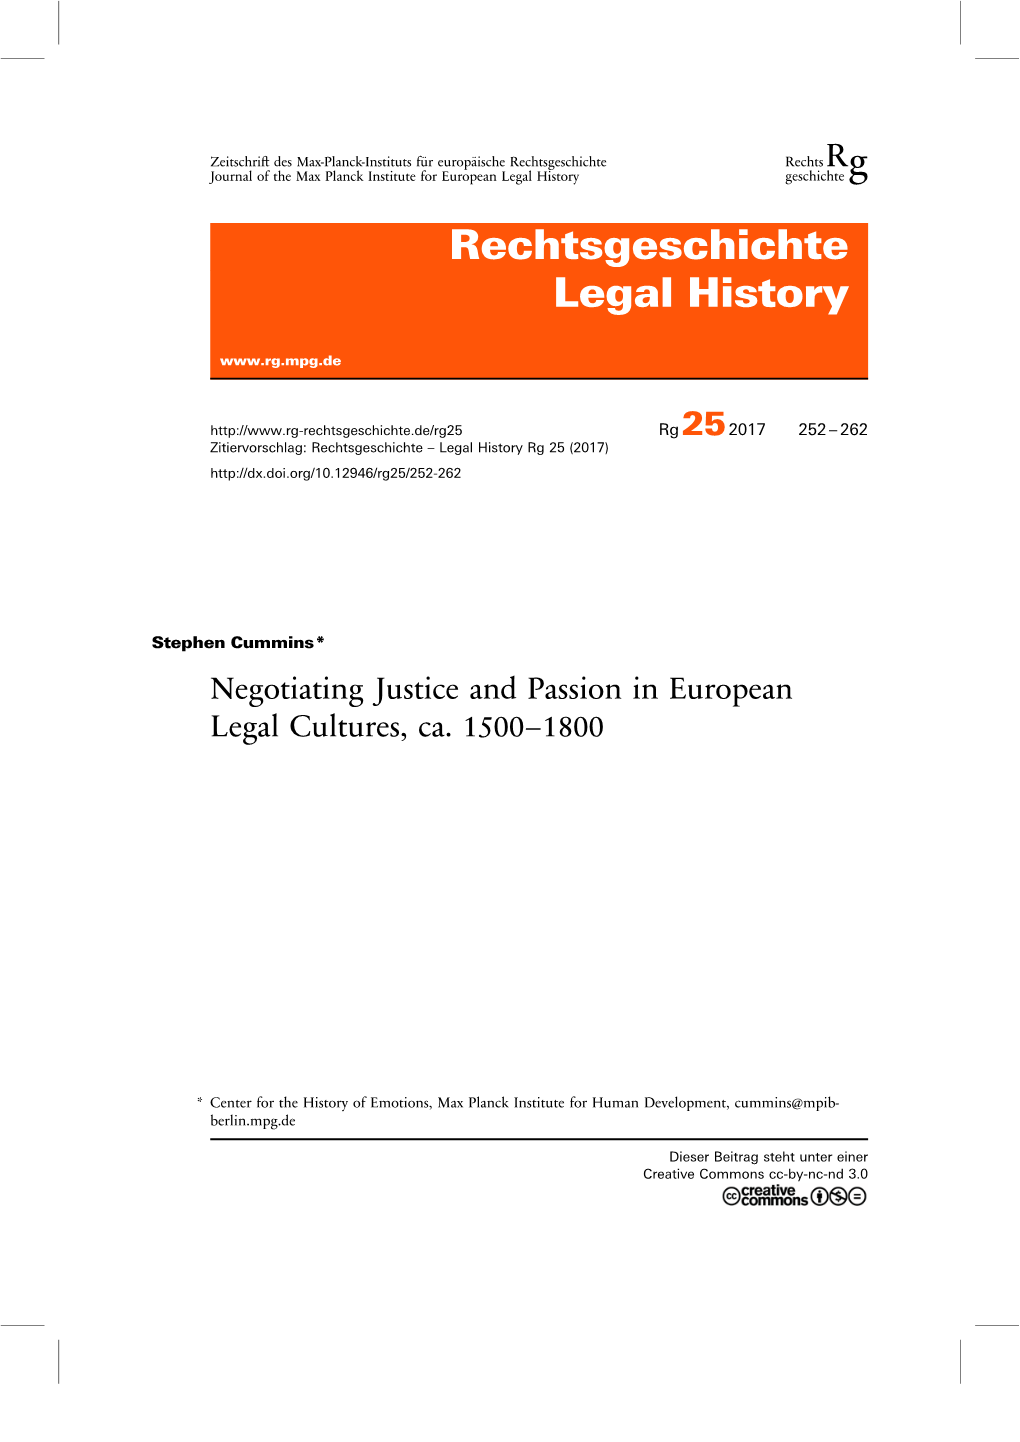 Negotiating Justice and Passion in European Legal Cultures, Ca. 1500–1800